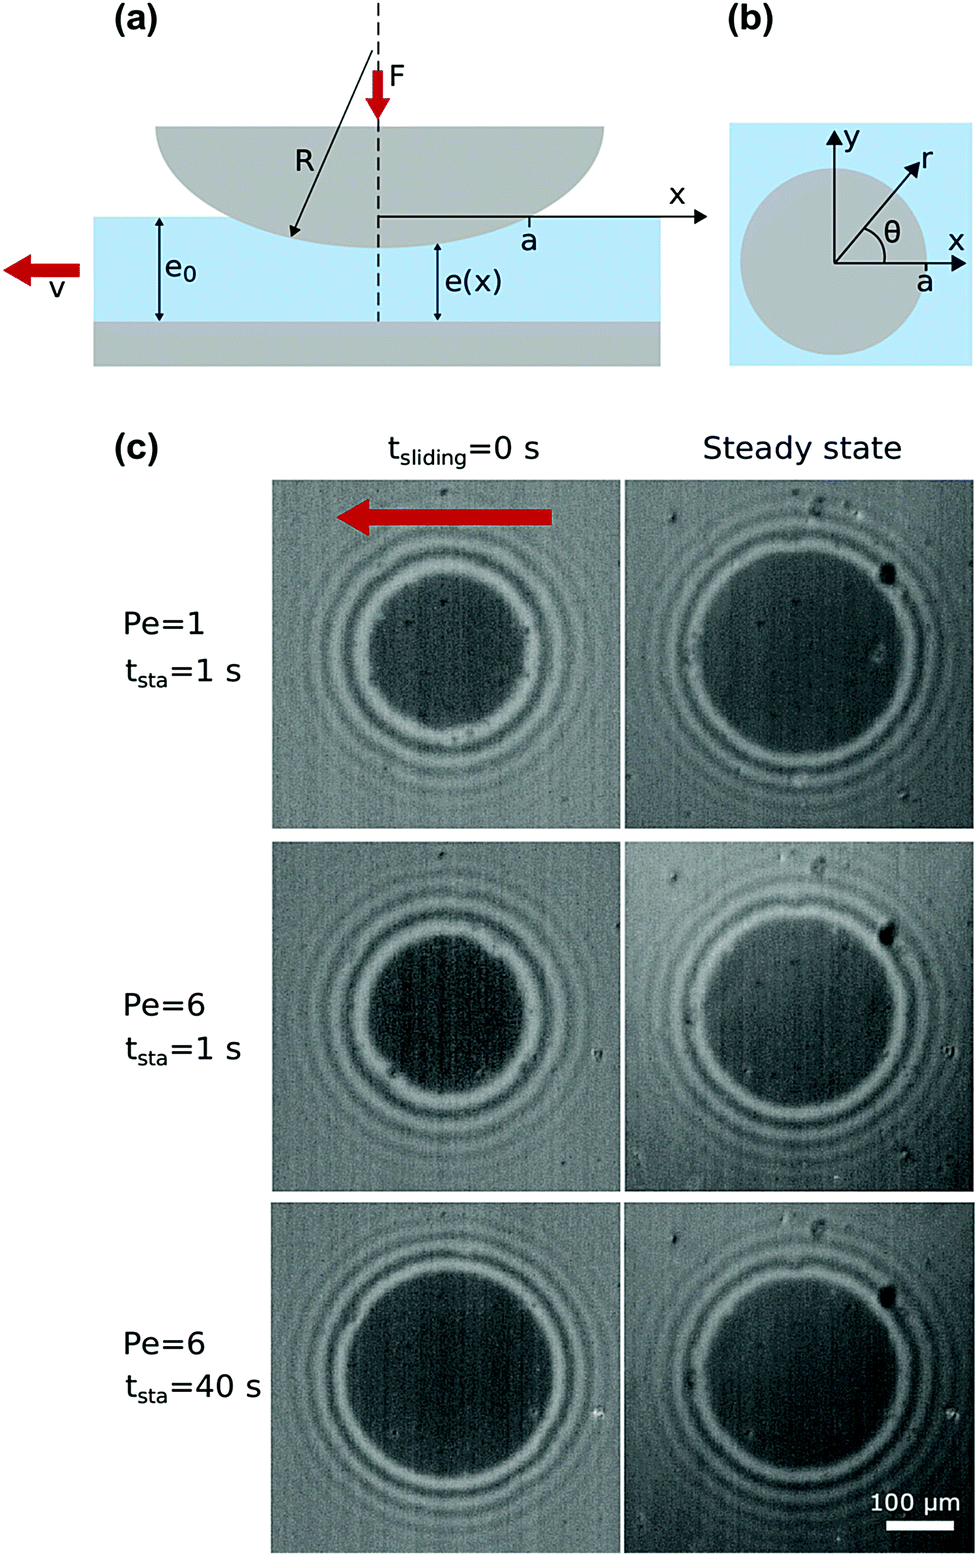 Transient Sliding Of Thin Hydrogel Films The Role Of Poroelasticity Soft Matter Rsc Publishing